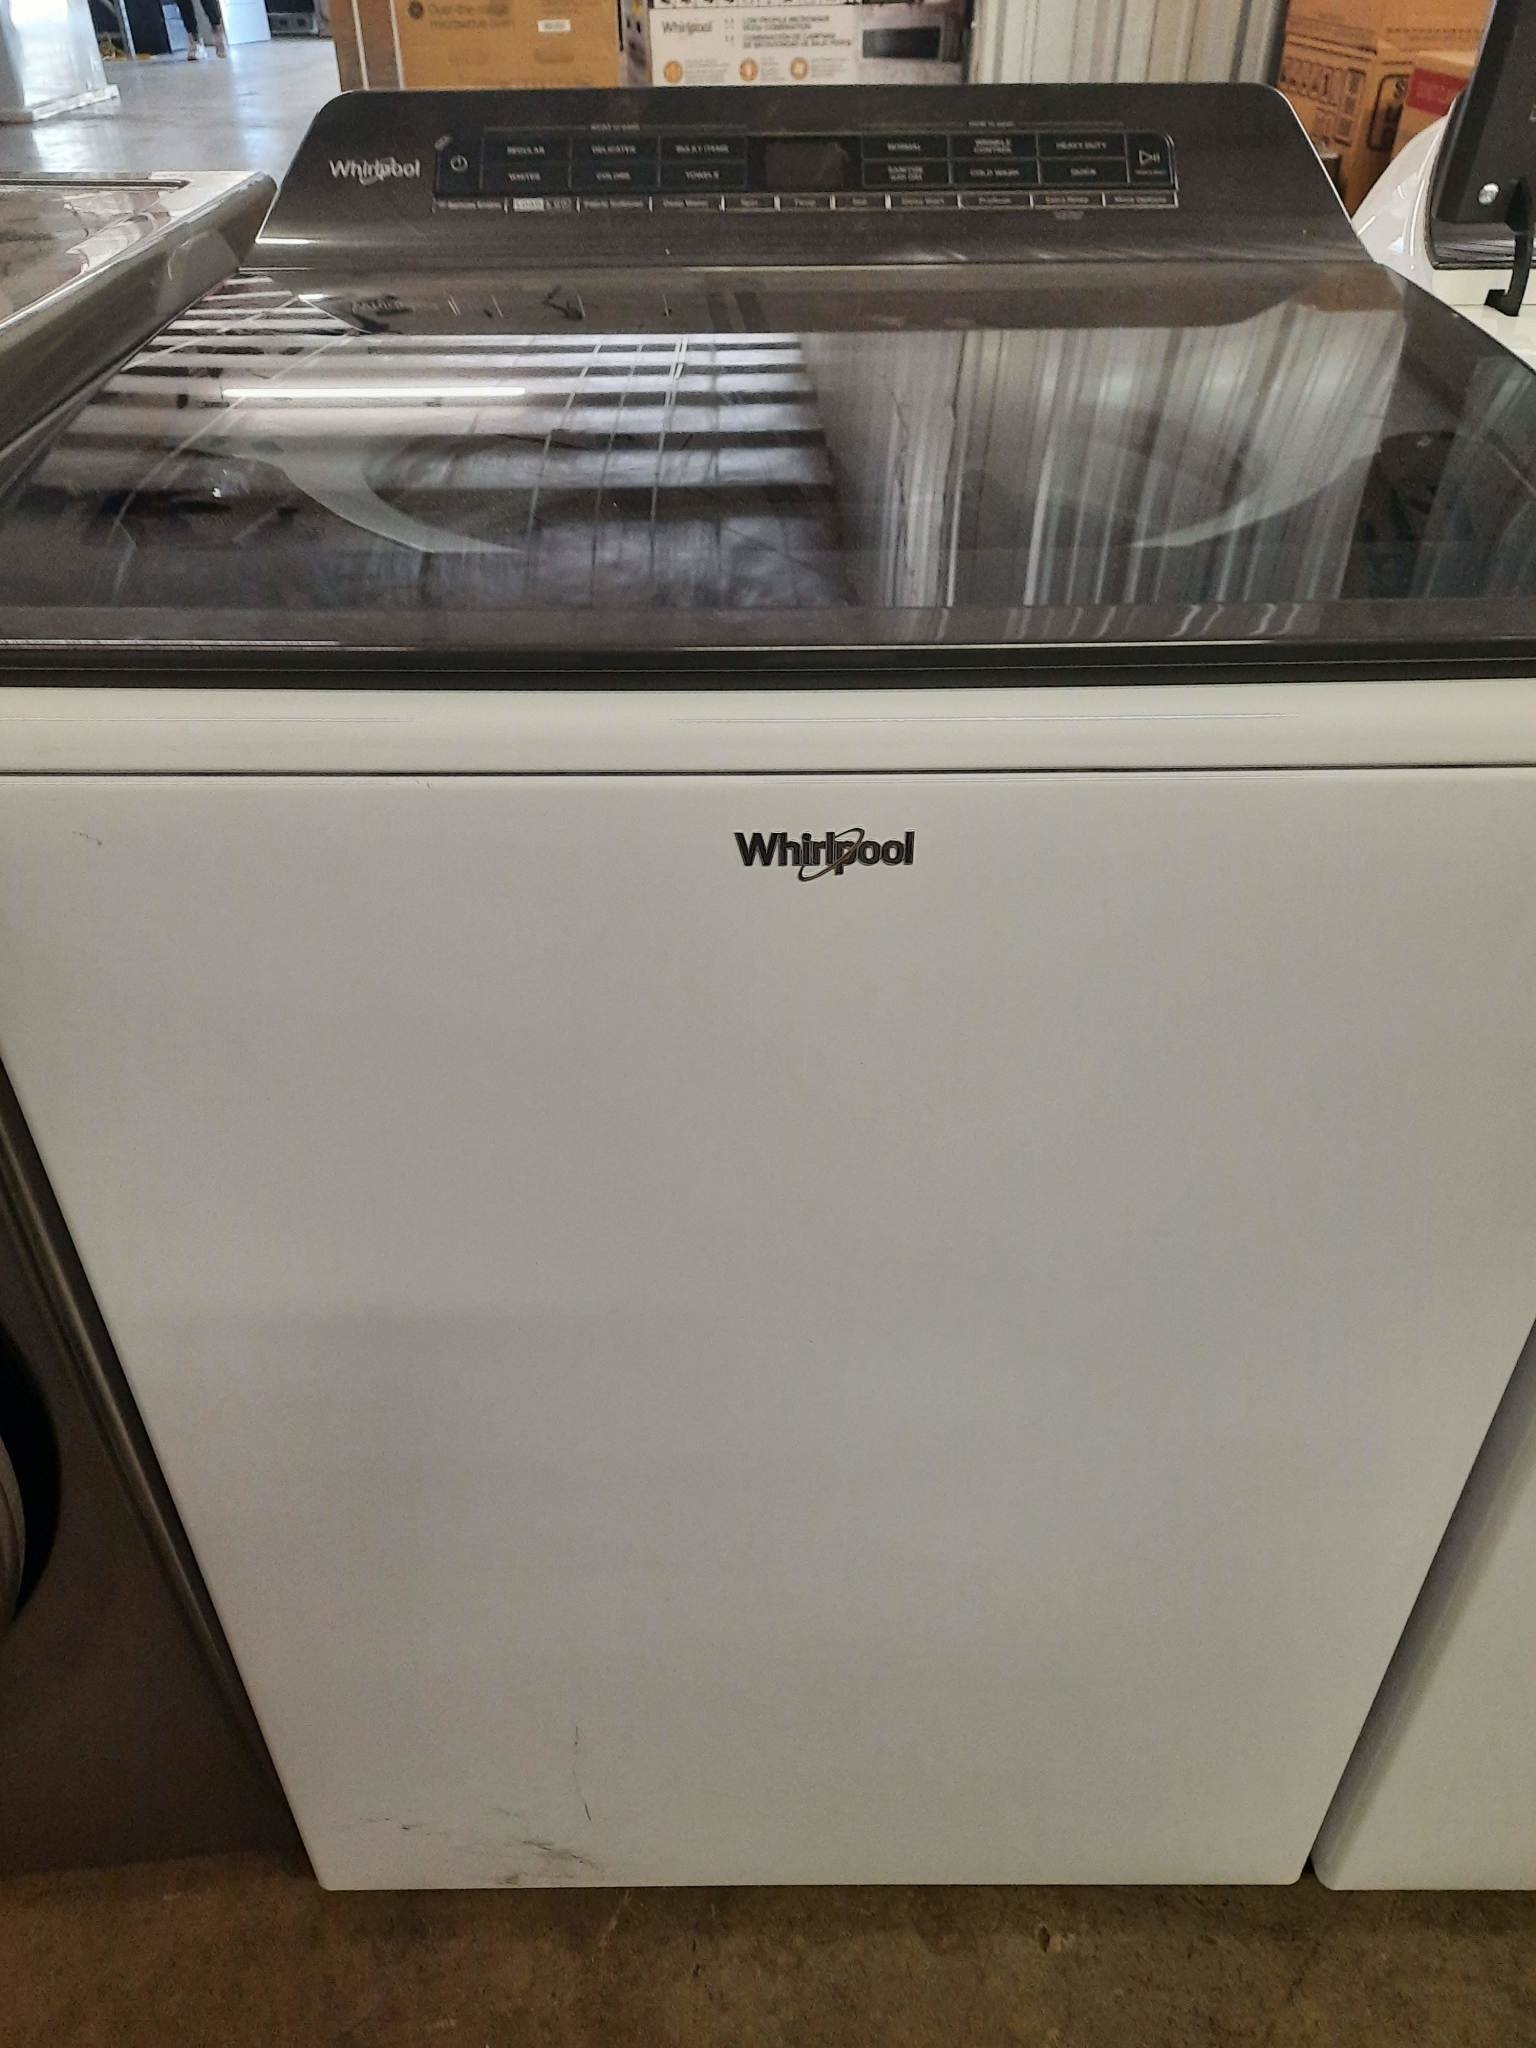 Whirlpool *Whirlpool  WTW6120HW 4.8 cu. ft. Smart White Top Load Washing Machine with Load and Go, Built-in Water Faucet and Stain Brush